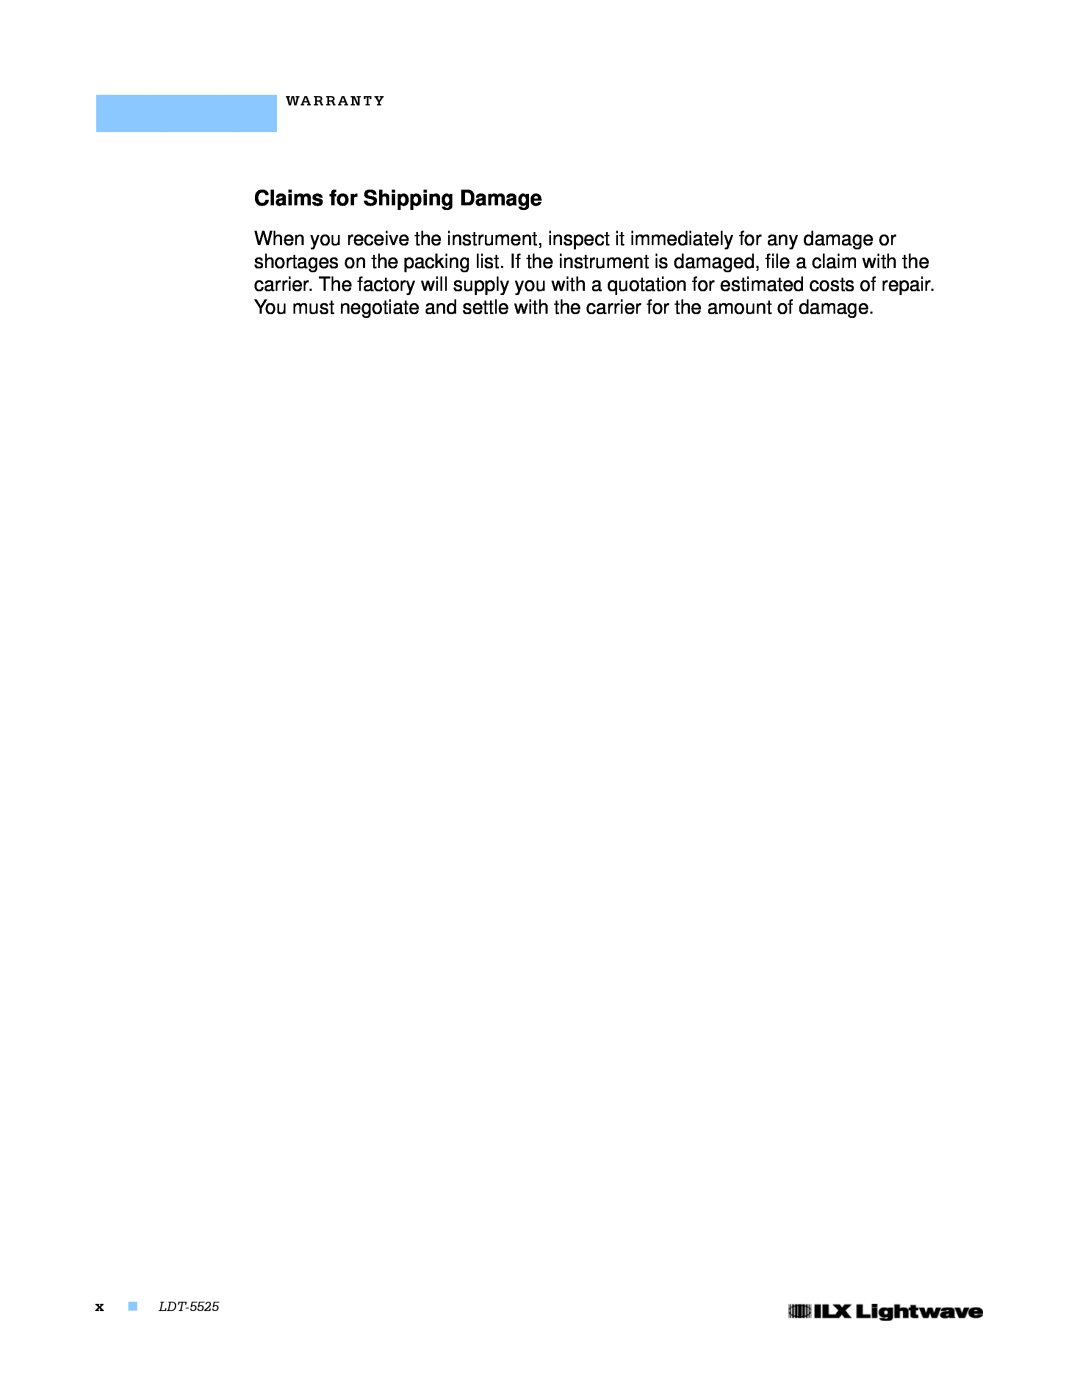 Lightwave Communications manual Claims for Shipping Damage, Wa R R A N T Y, x LDT-5525 